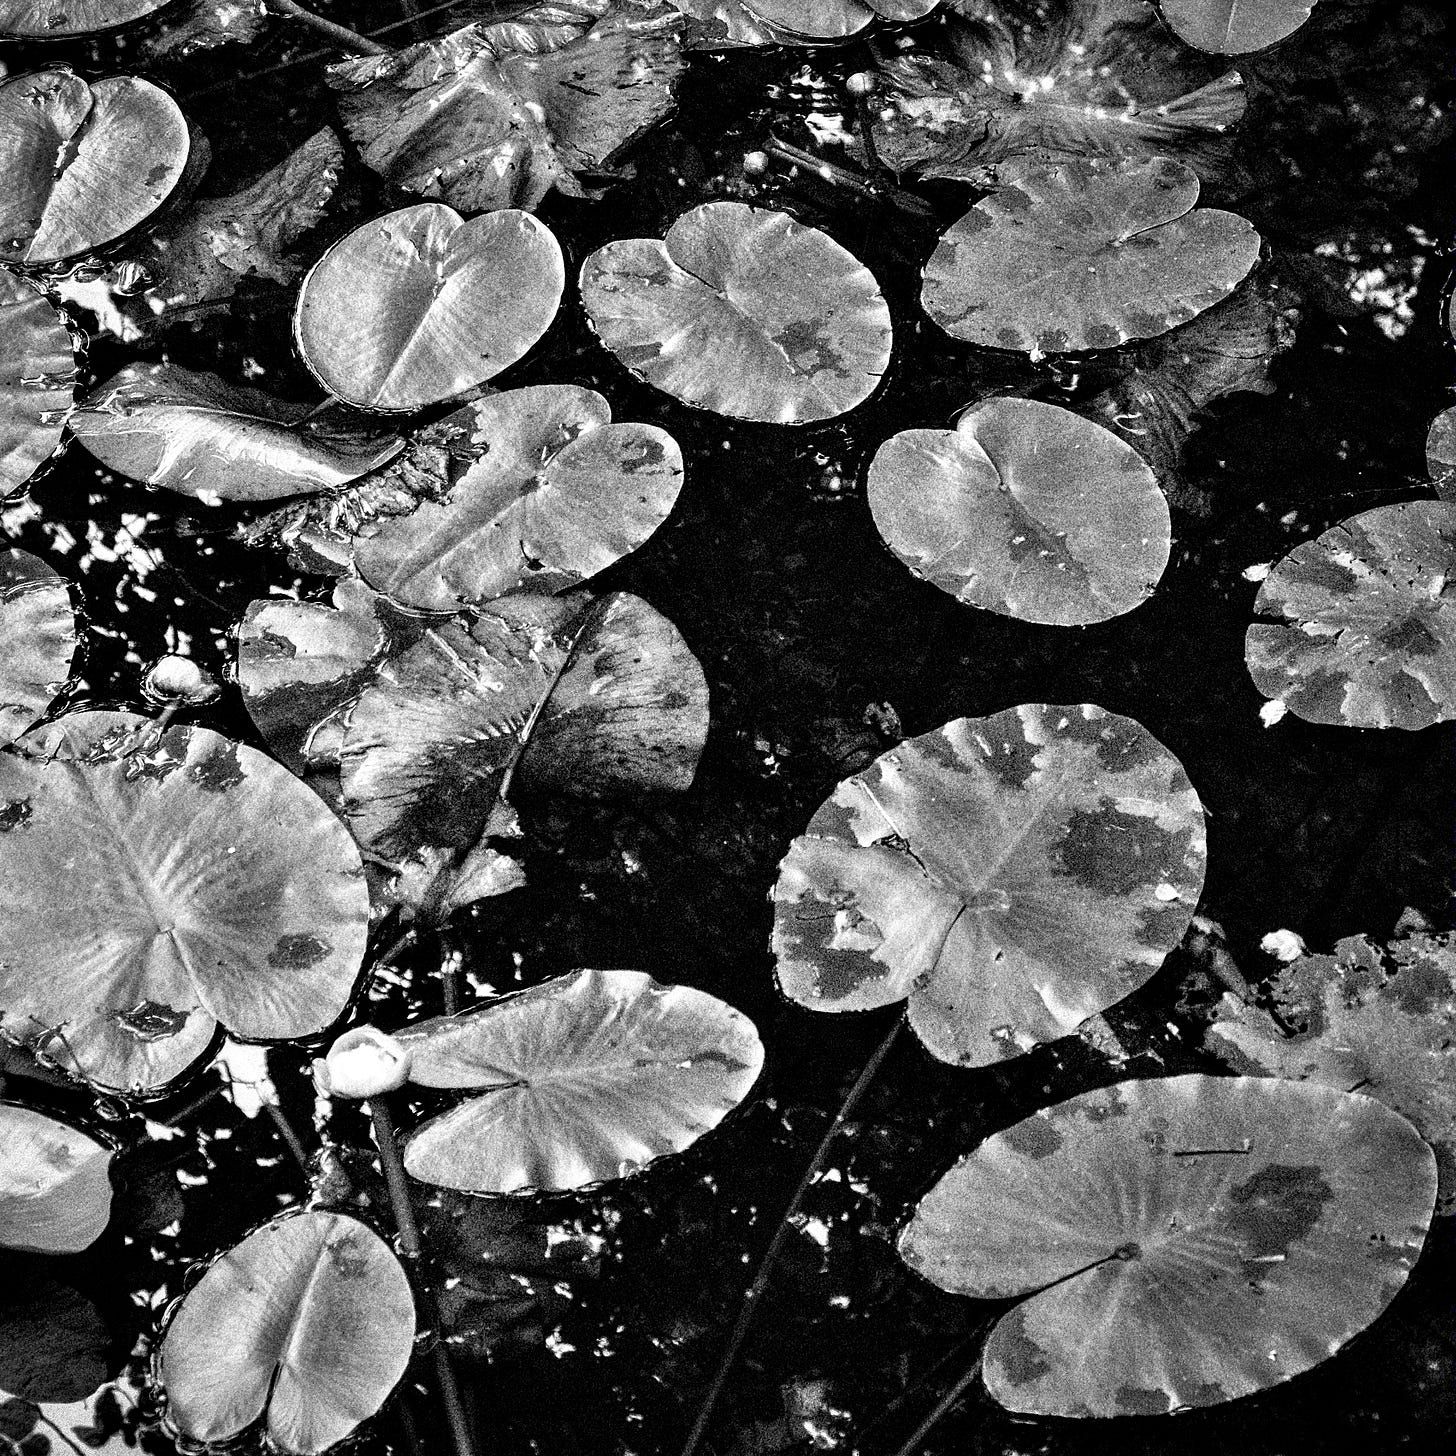 water lilies in speckled direct sunlight